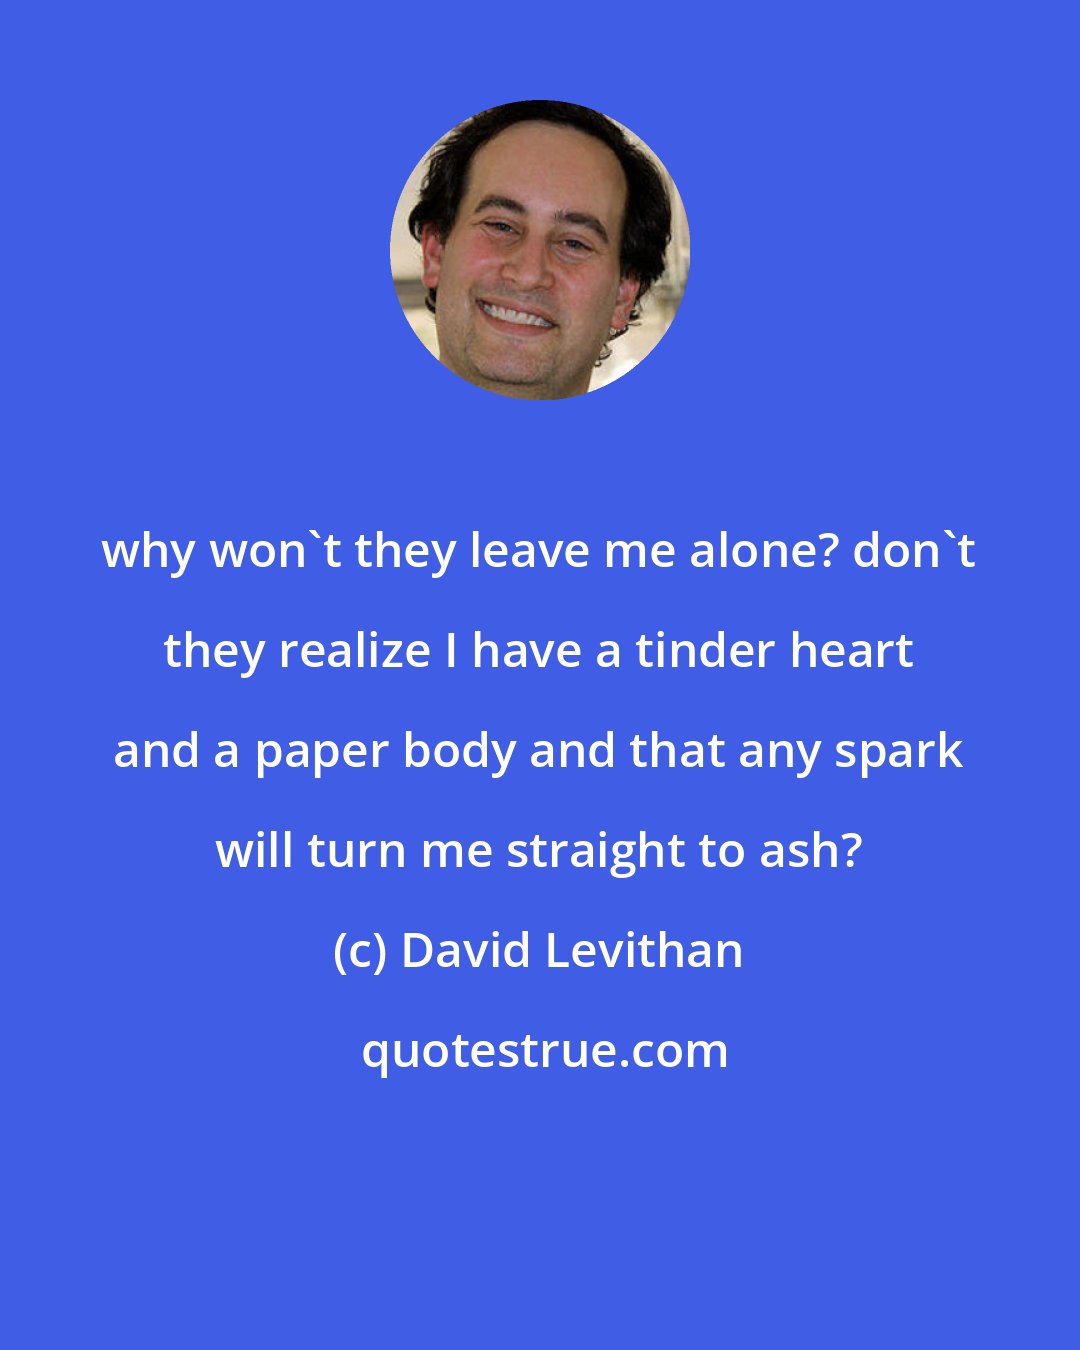 David Levithan: why won't they leave me alone? don't they realize I have a tinder heart and a paper body and that any spark will turn me straight to ash?